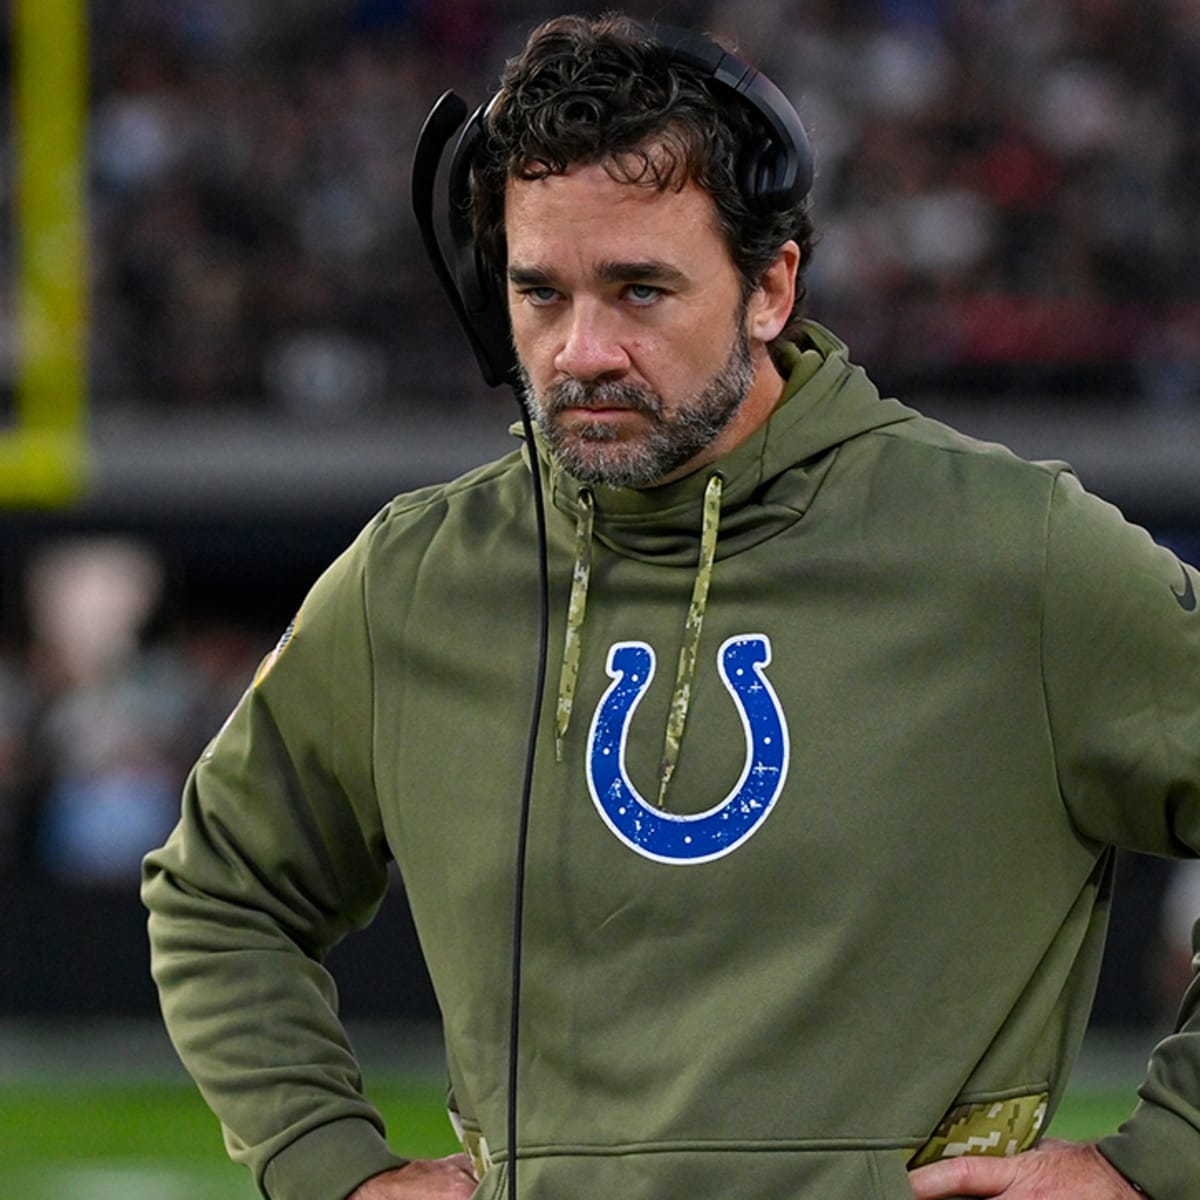 SportsCenter Hosts Awkwardly Report Jeff Saturday Is New Colts